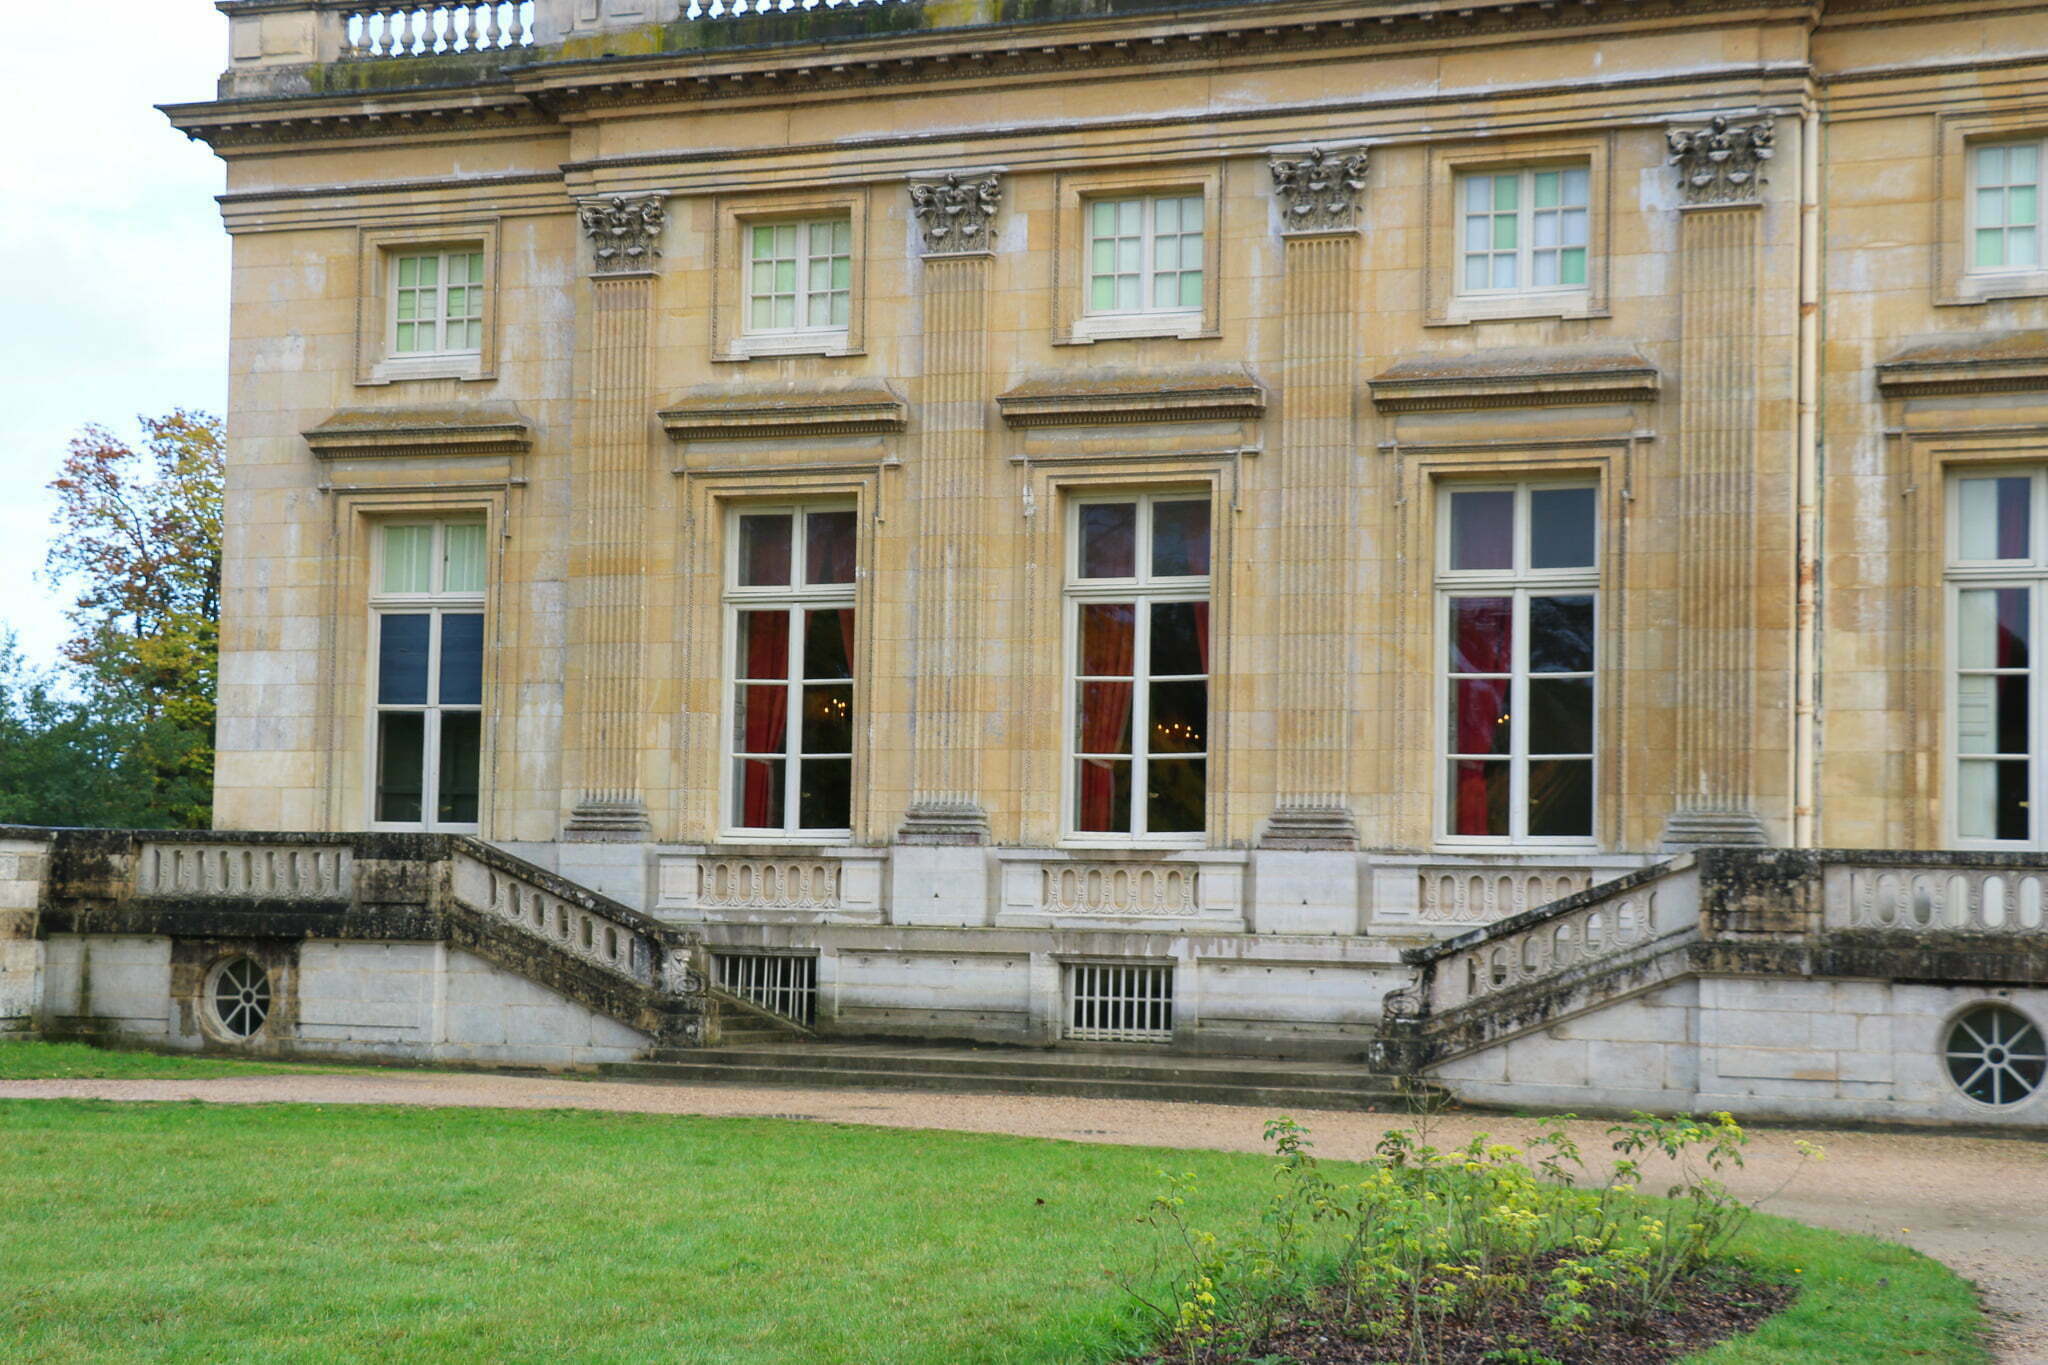 The exterior of the Petit Trianon with the gardens in the foreground